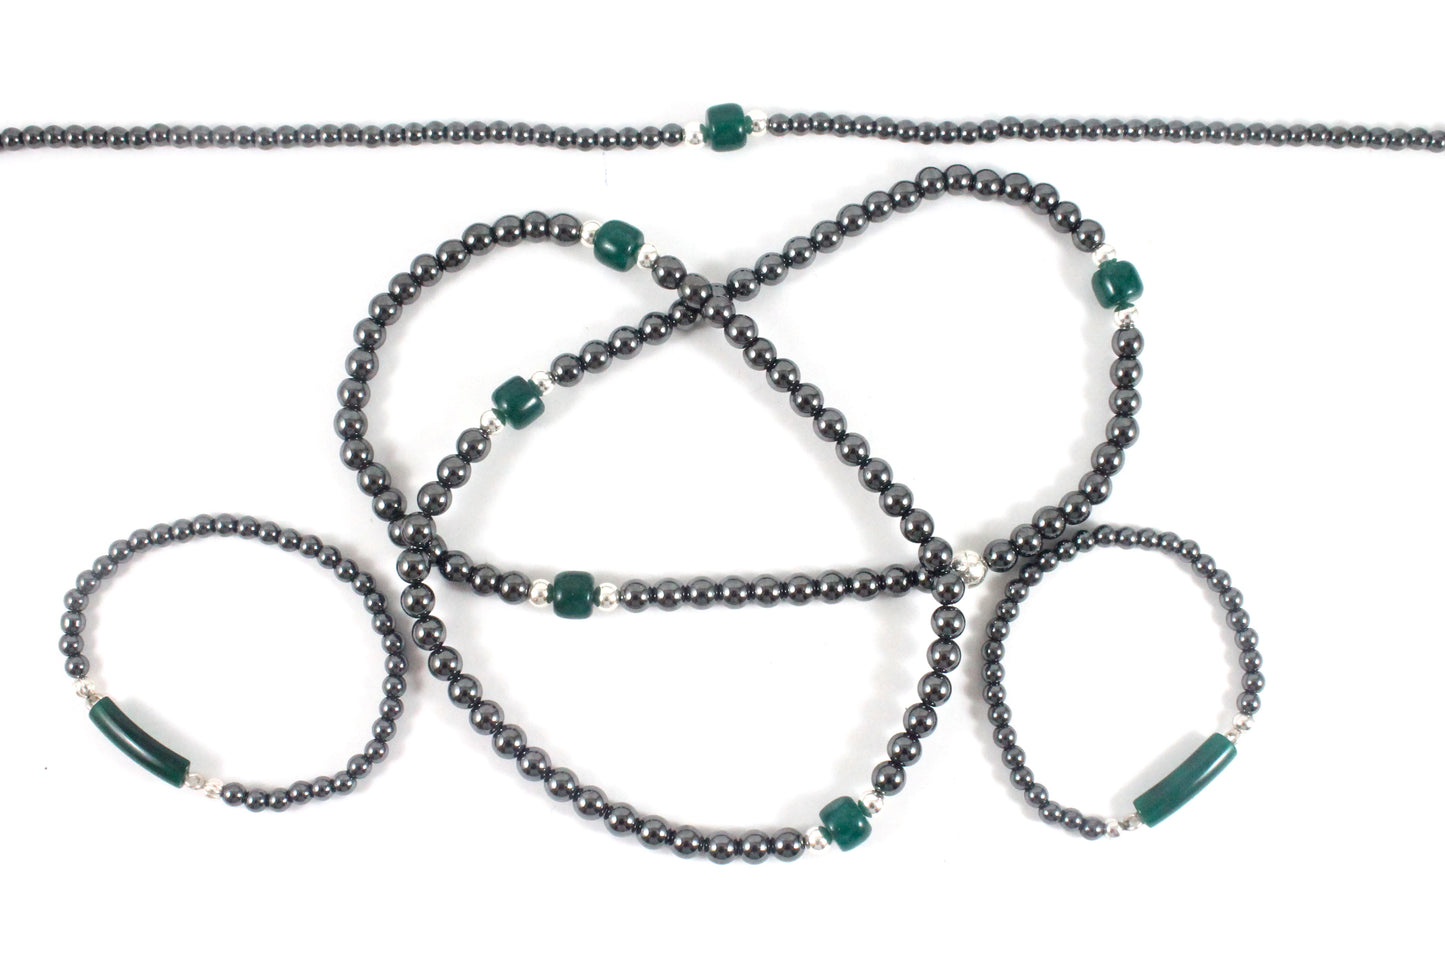 Hematite/Jade Necklace - Jane Collection -The Ricci District